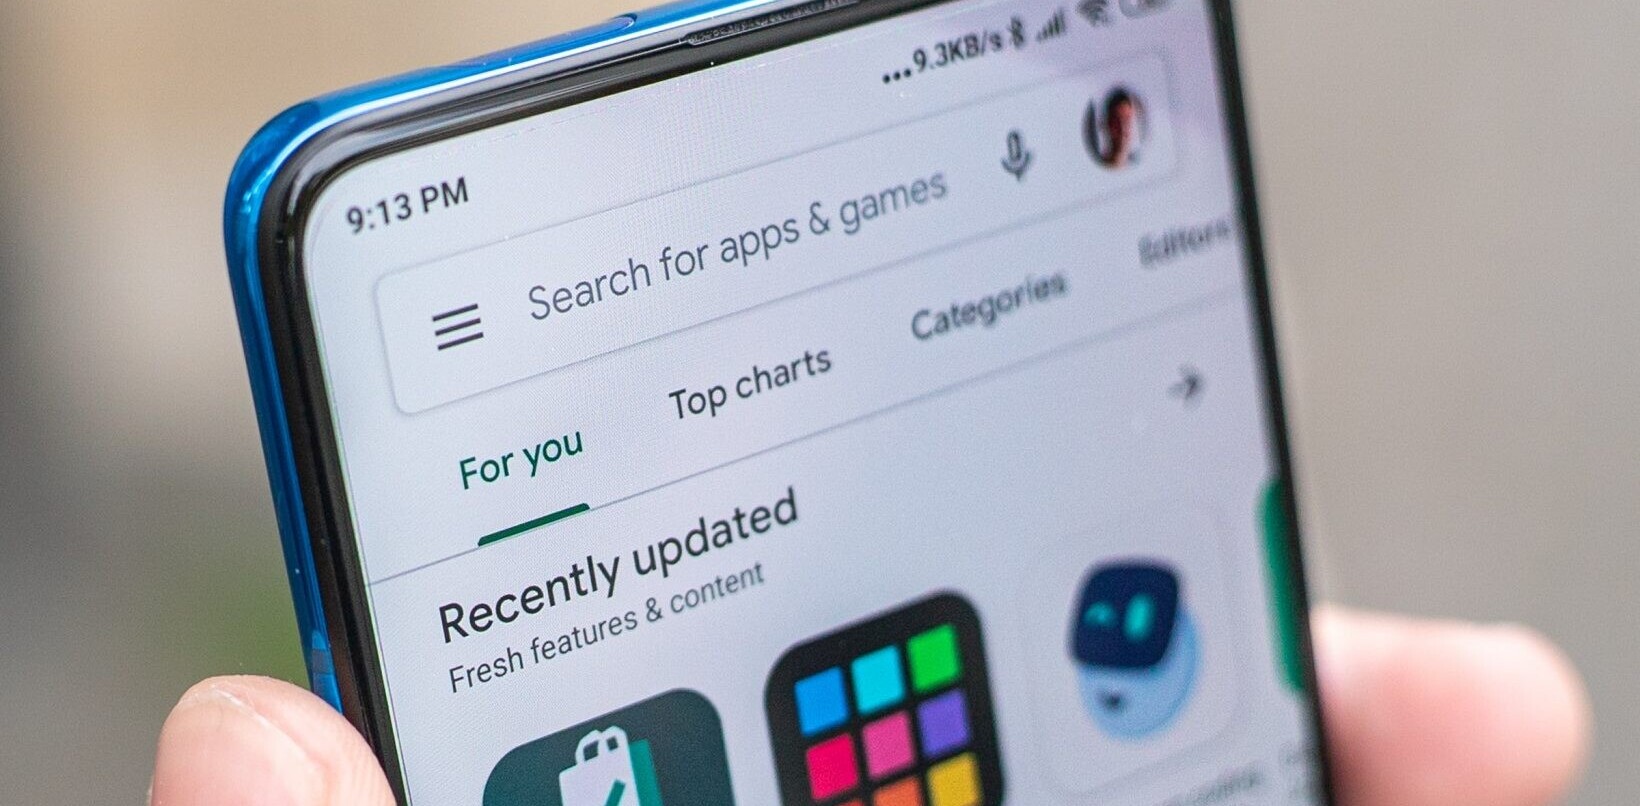 Google Play Store introduces a nifty change: Local app ratings